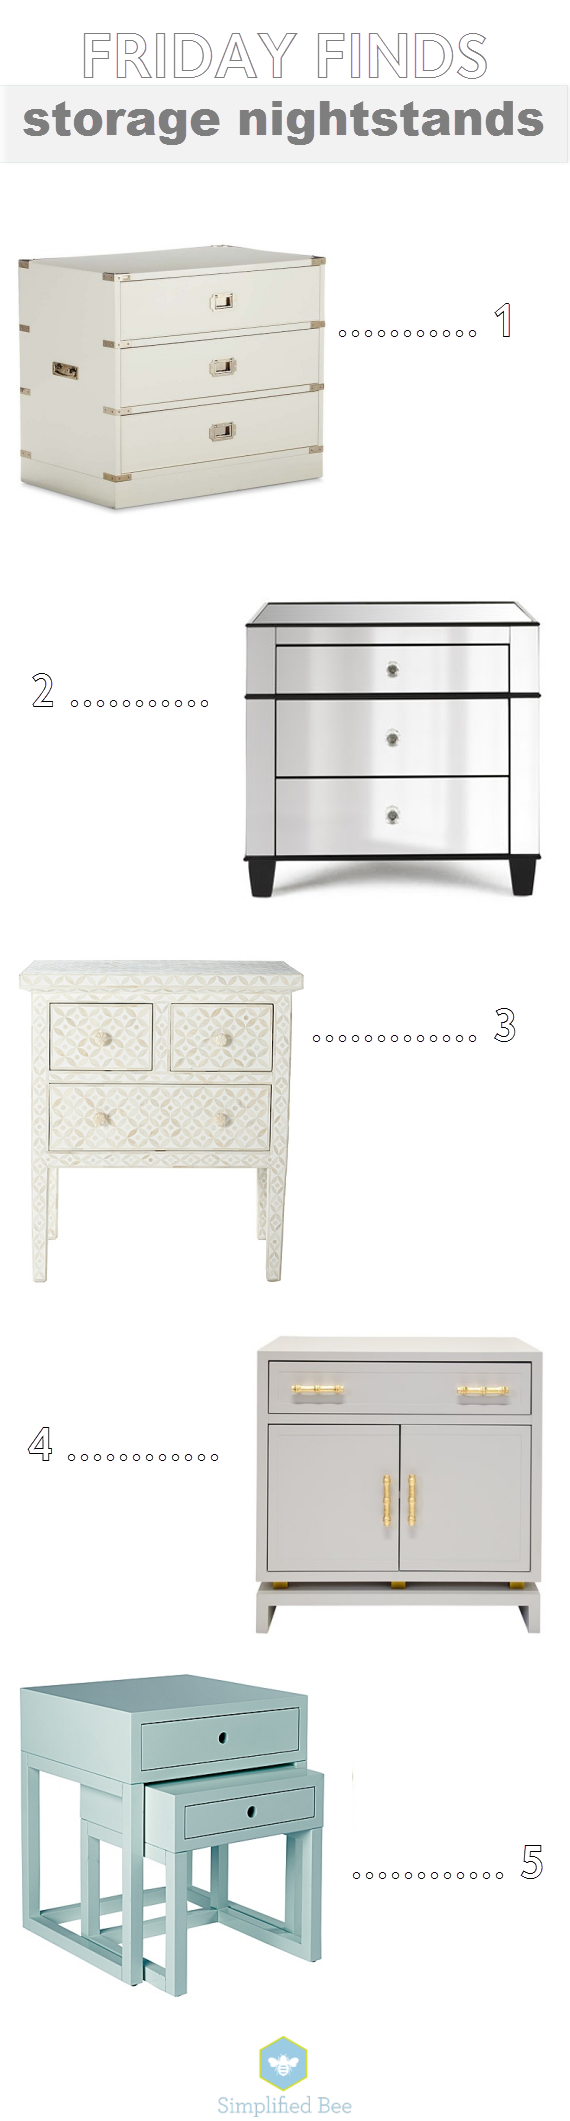 stylish nightstands with storage space // simplified bee